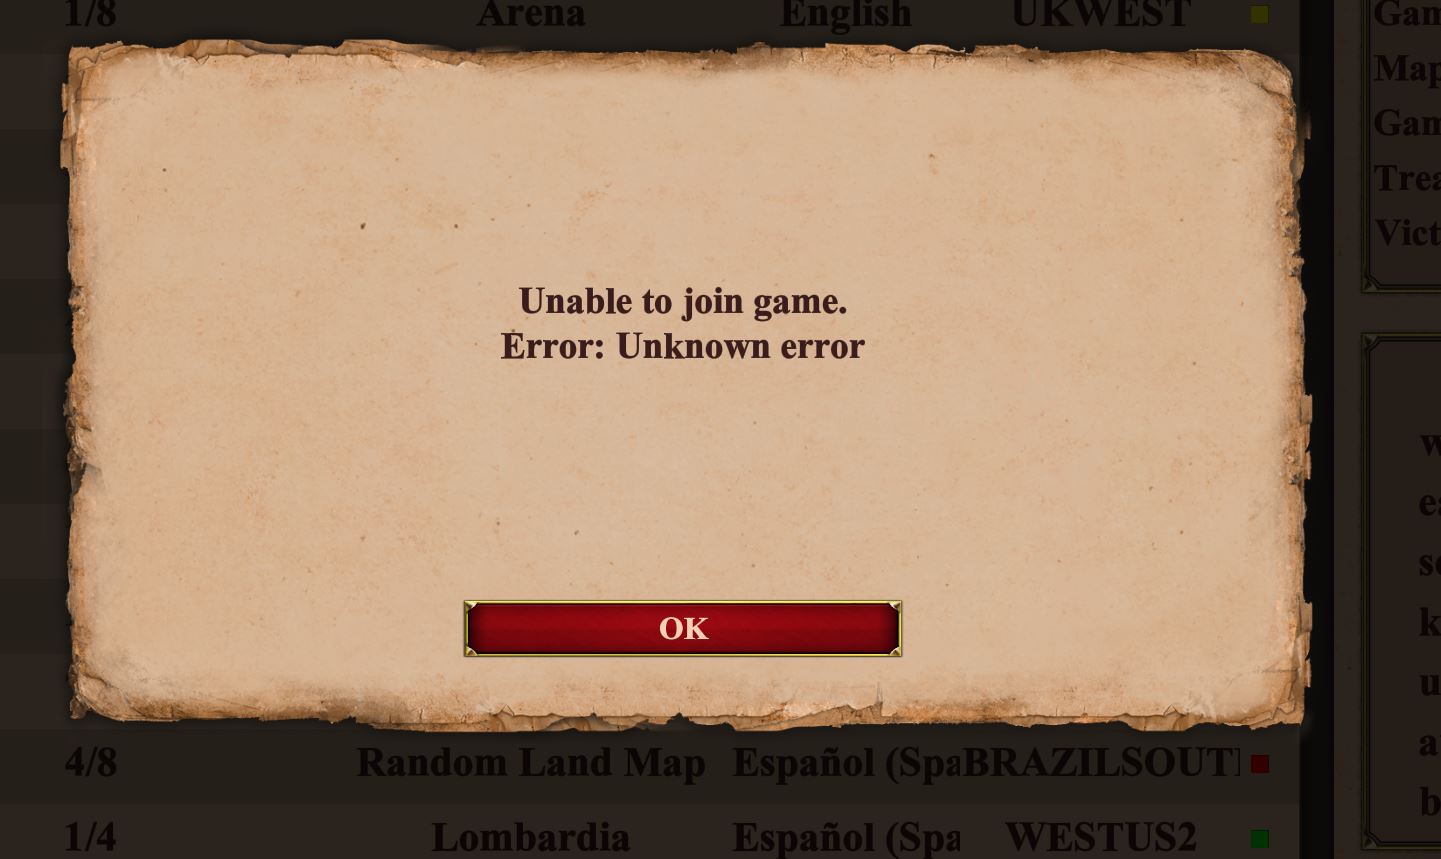 error when trying to join the game